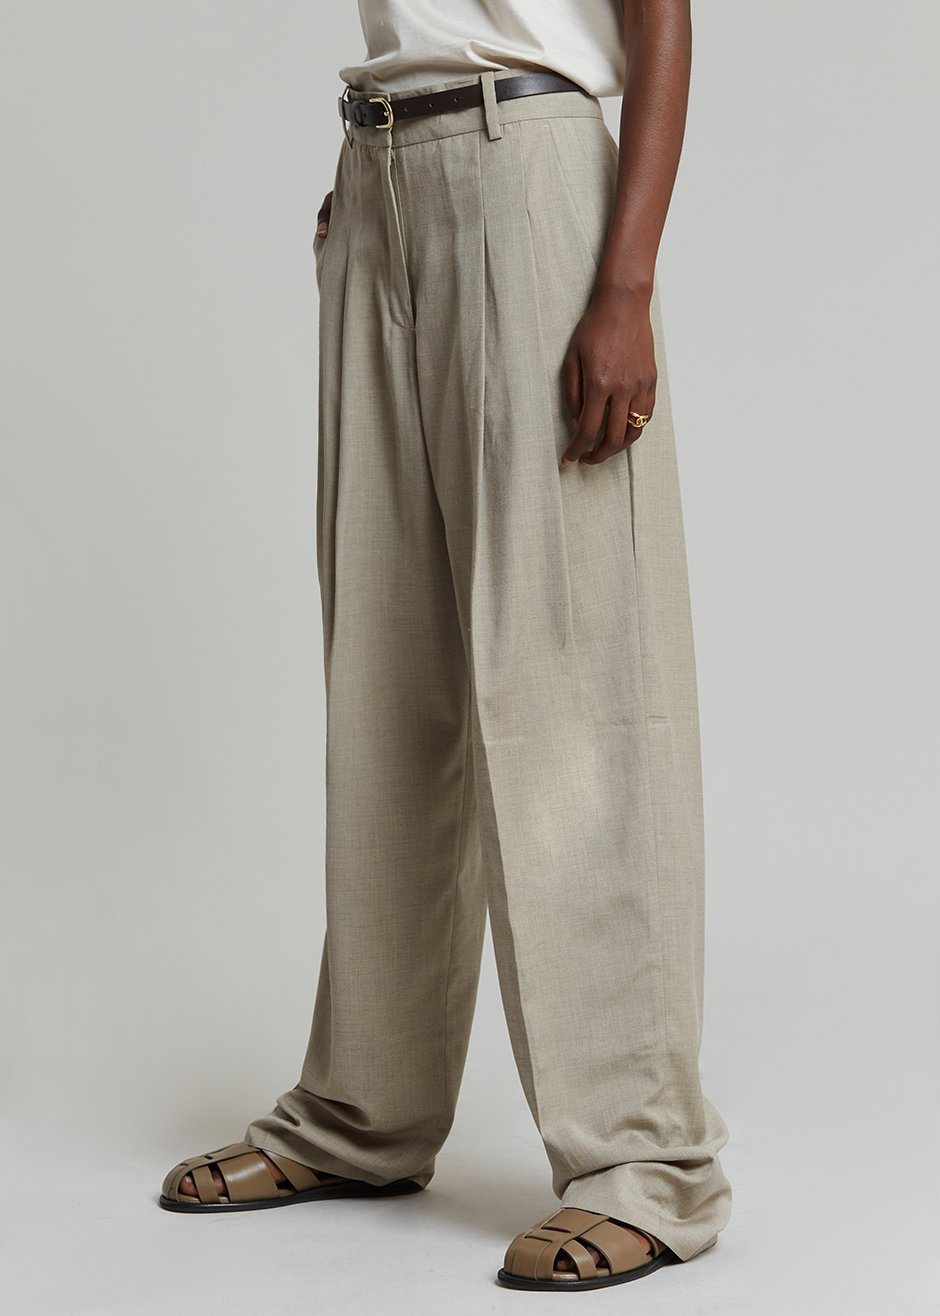 Gelso Pleated Trousers - Light Taupe Melange - 7